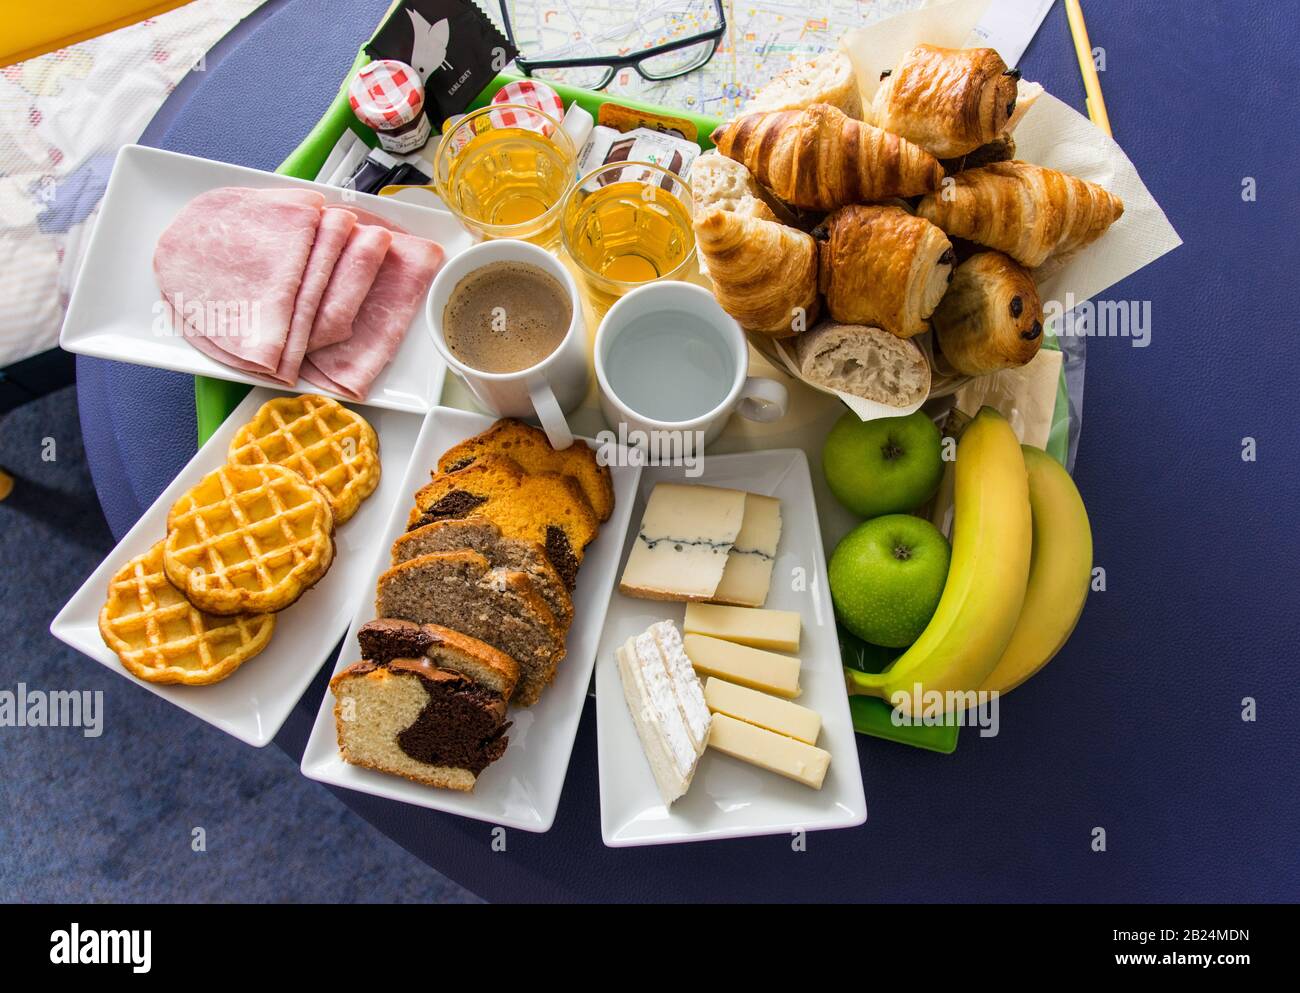 Beautiful continental breakfast served for two person and consisting of croissans, rolls, fruit, orange juice, coffee, tea, several types of cheese an Stock Photo